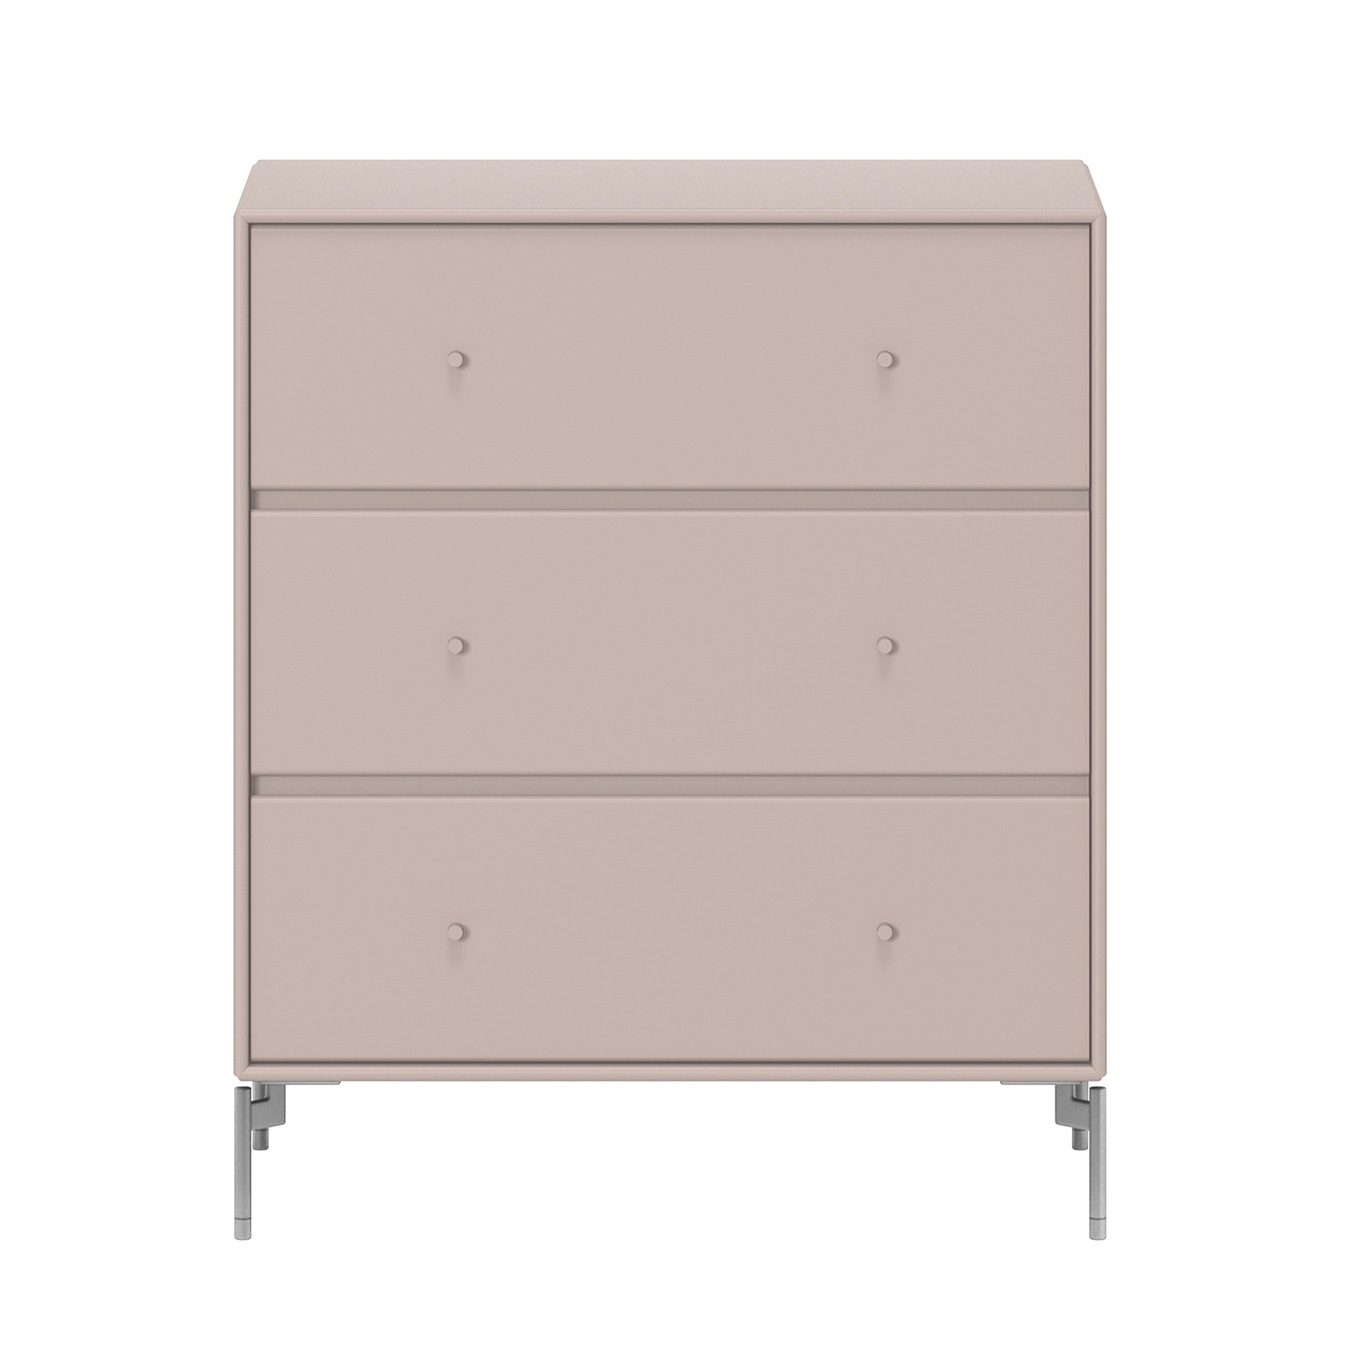 Carry Chest Of Drawers, Mushroom